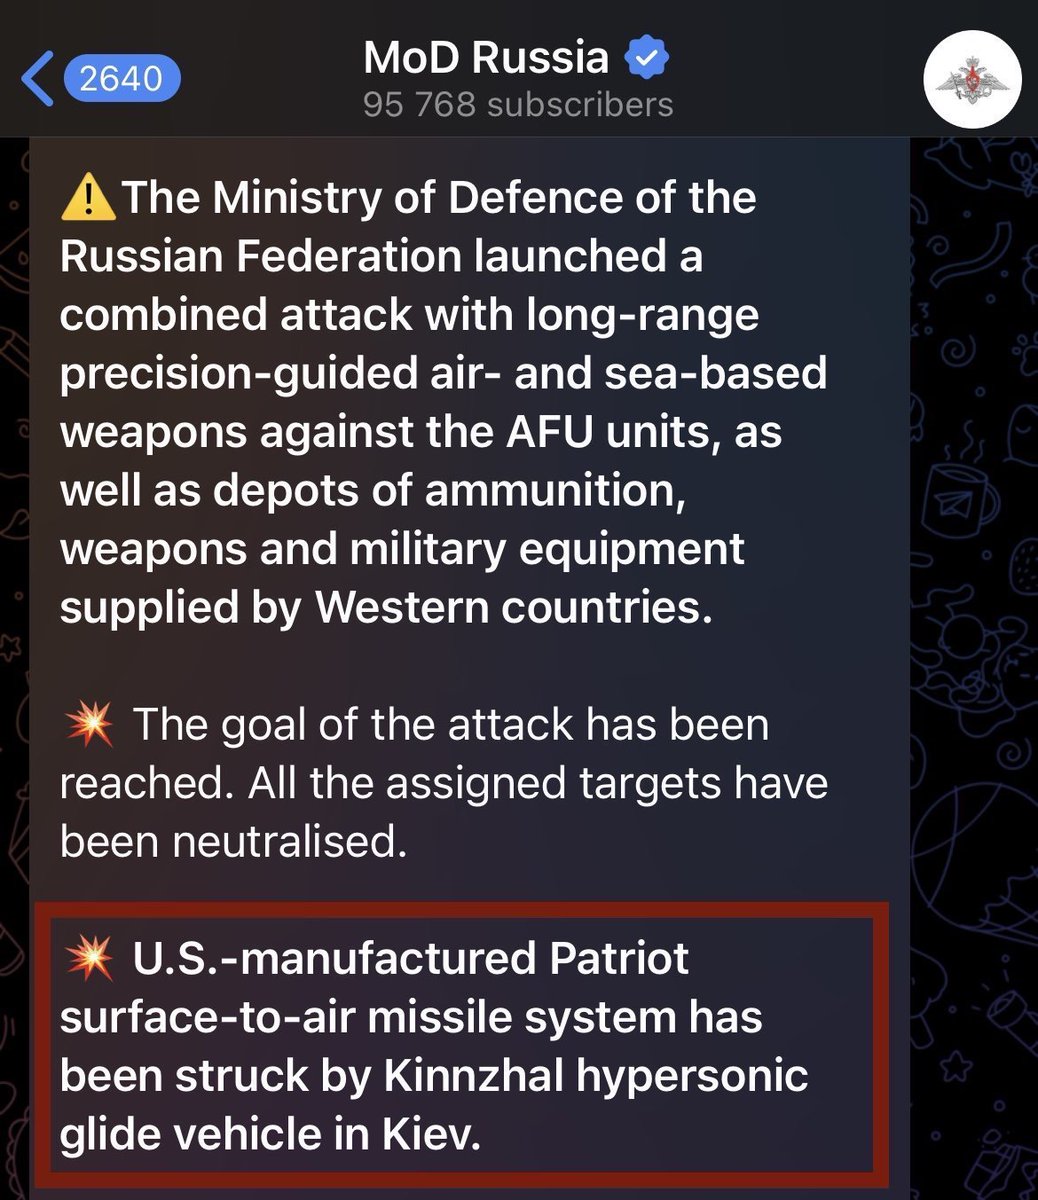 The russian ministry of defense's press service is more powerful than most countries' armies. russia doesn’t even need an army to conquer the entire world; its state media and MoD spokesperson konashenkov are more than adequate.